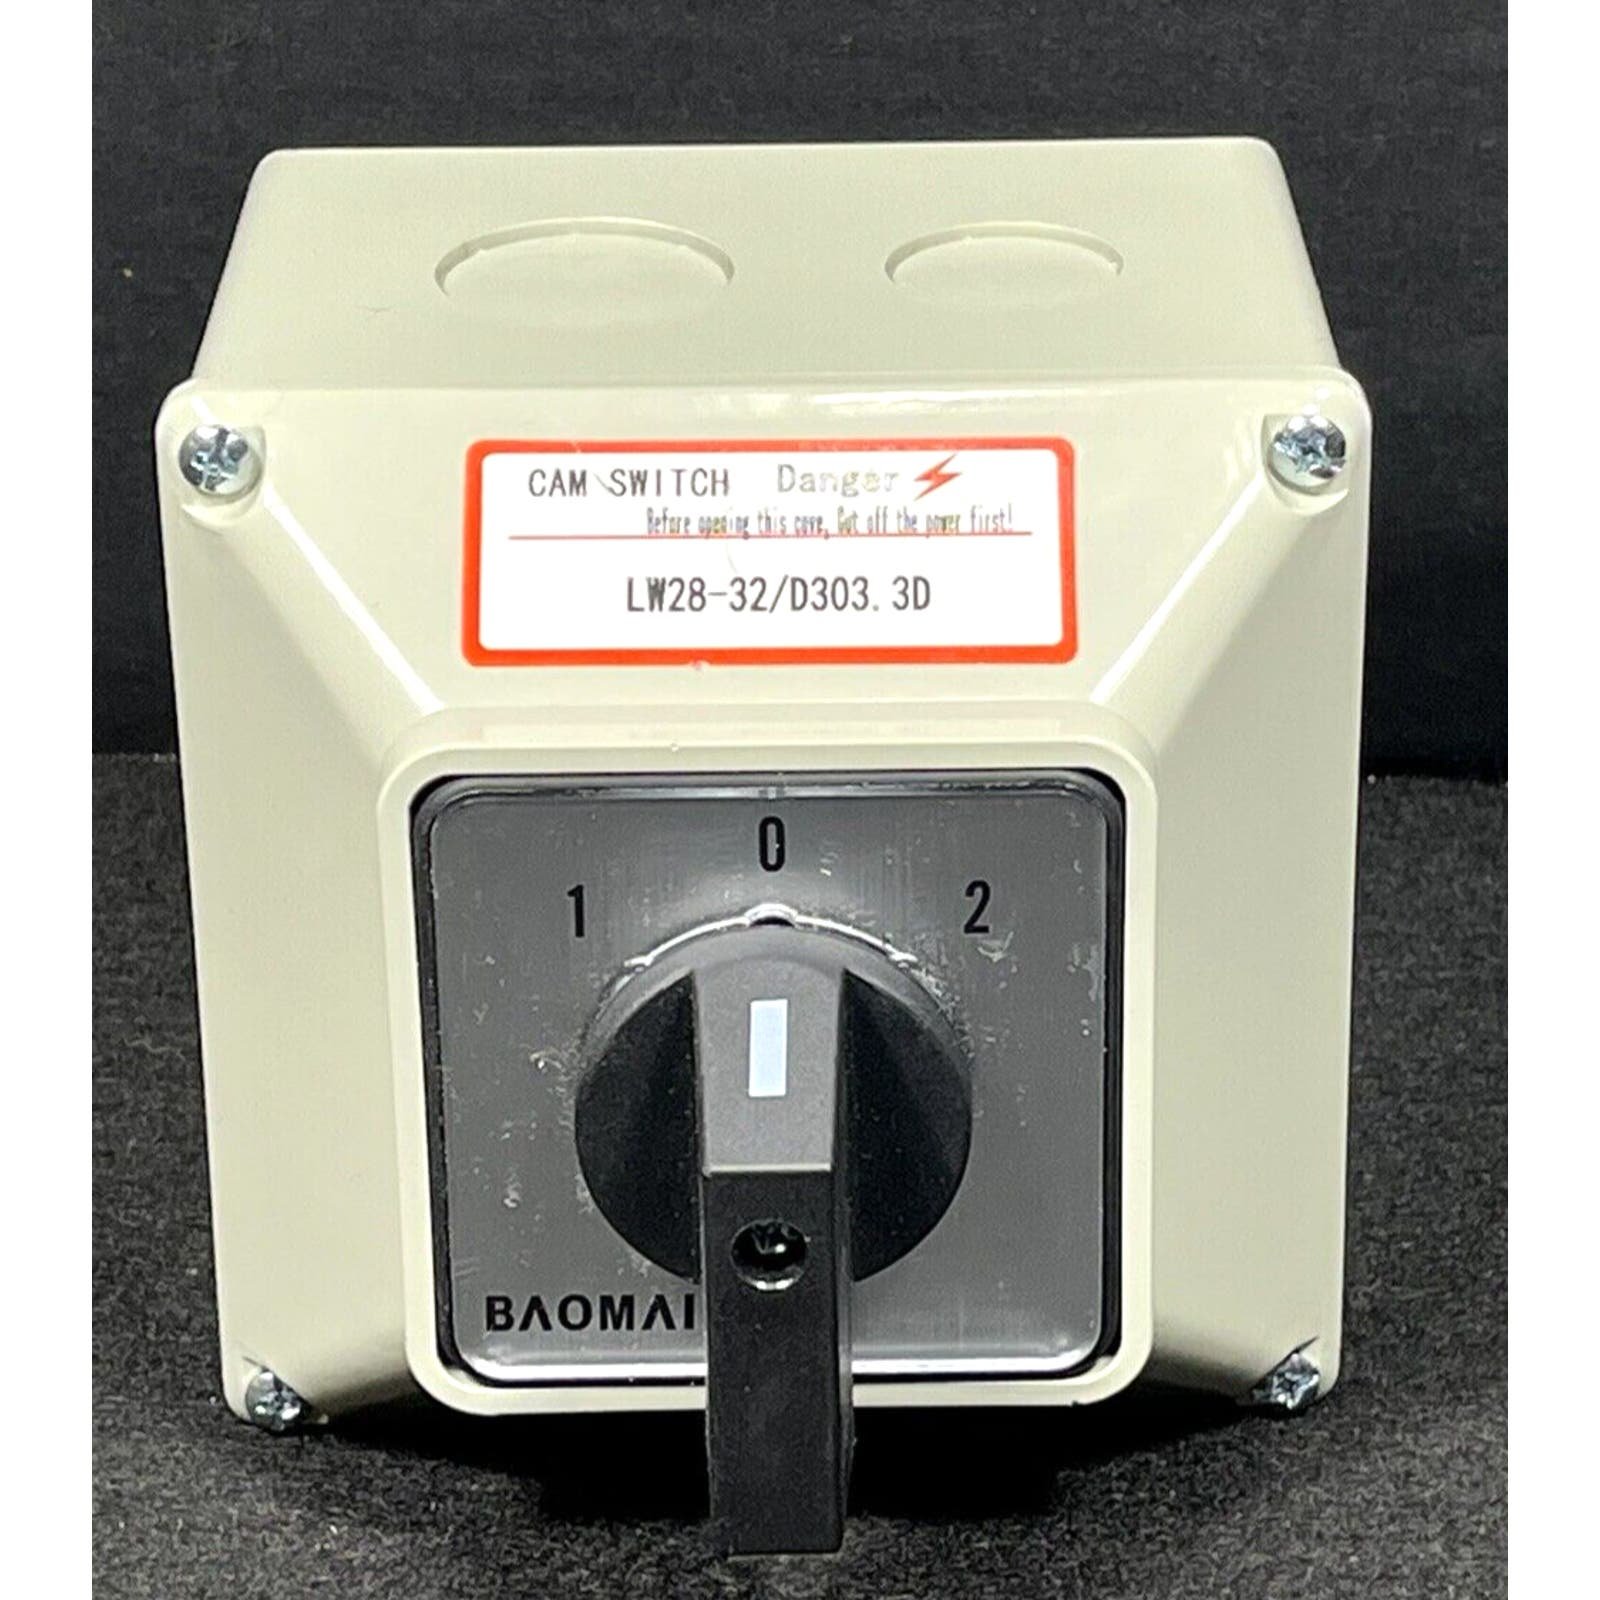 Baomain Universal Rotary Changeover Cam Switch LW28-32/